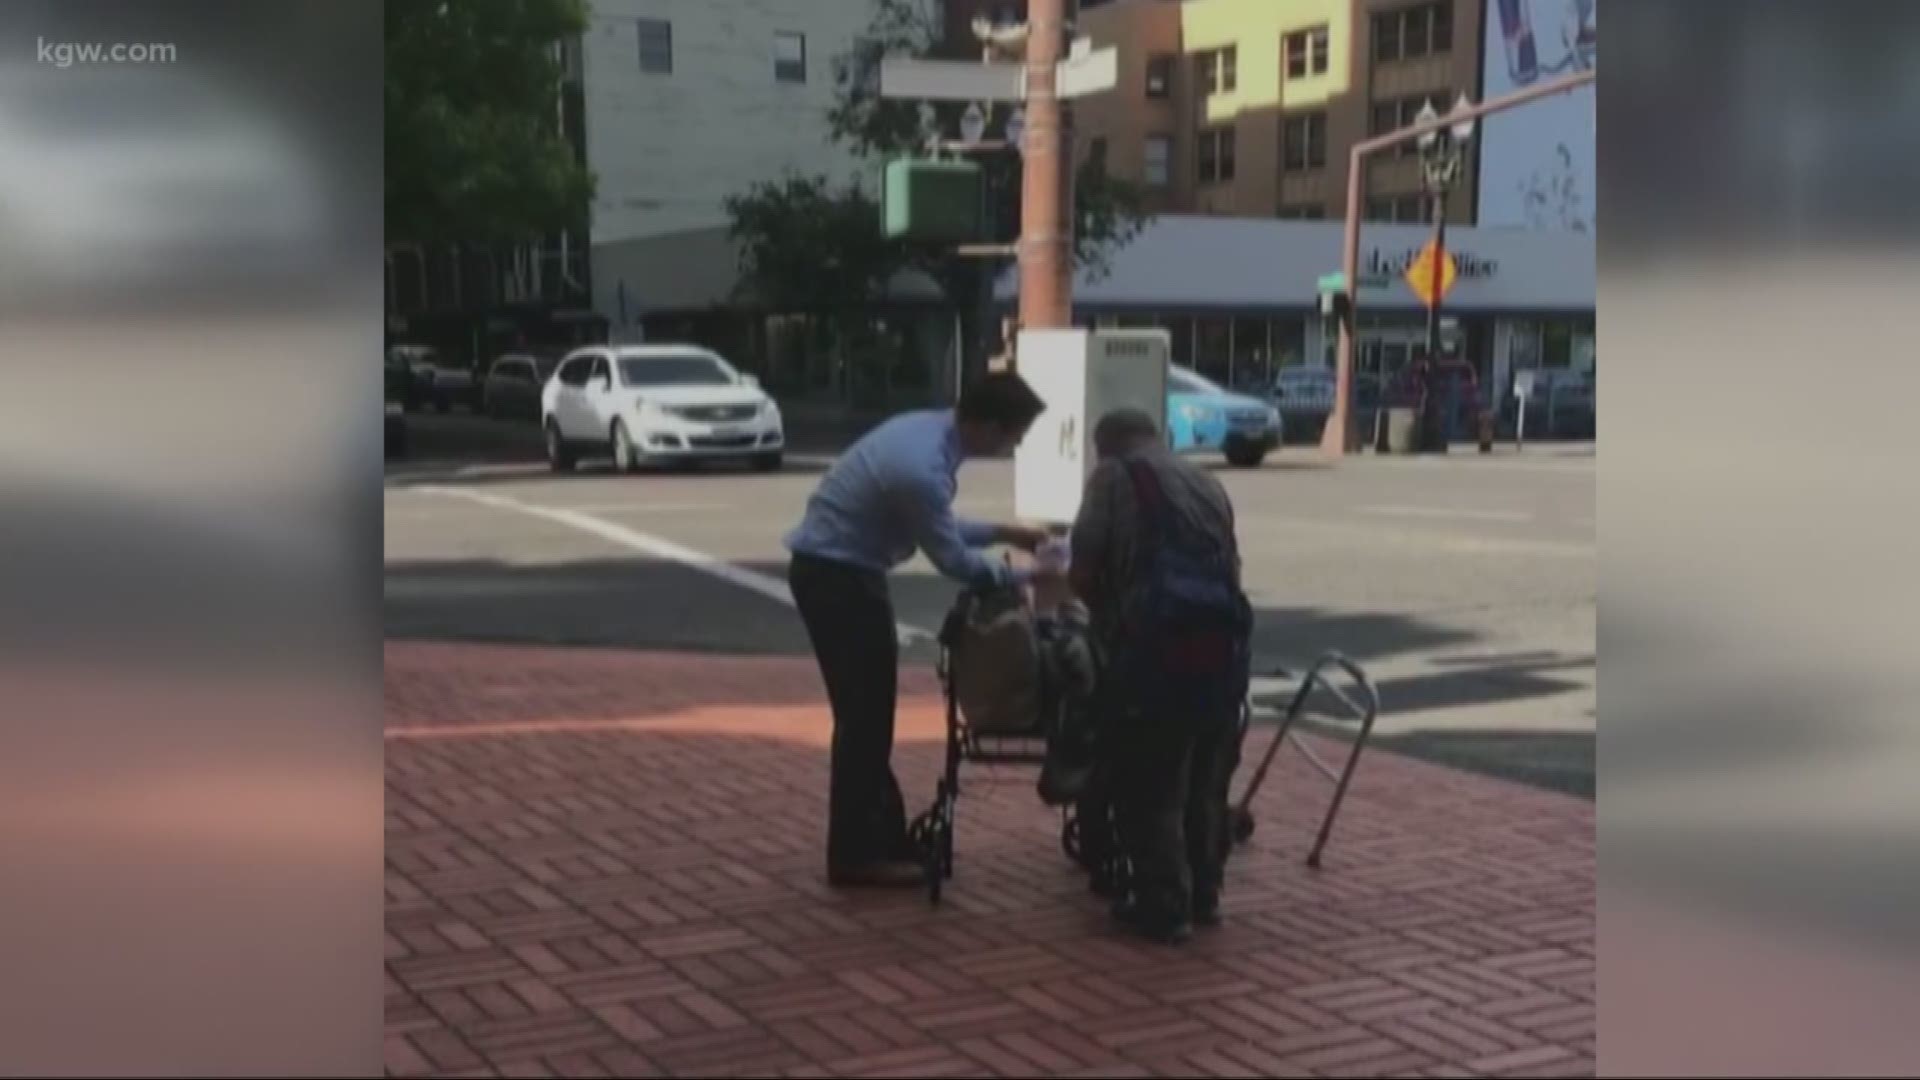 Man helps stranger in act or kindness